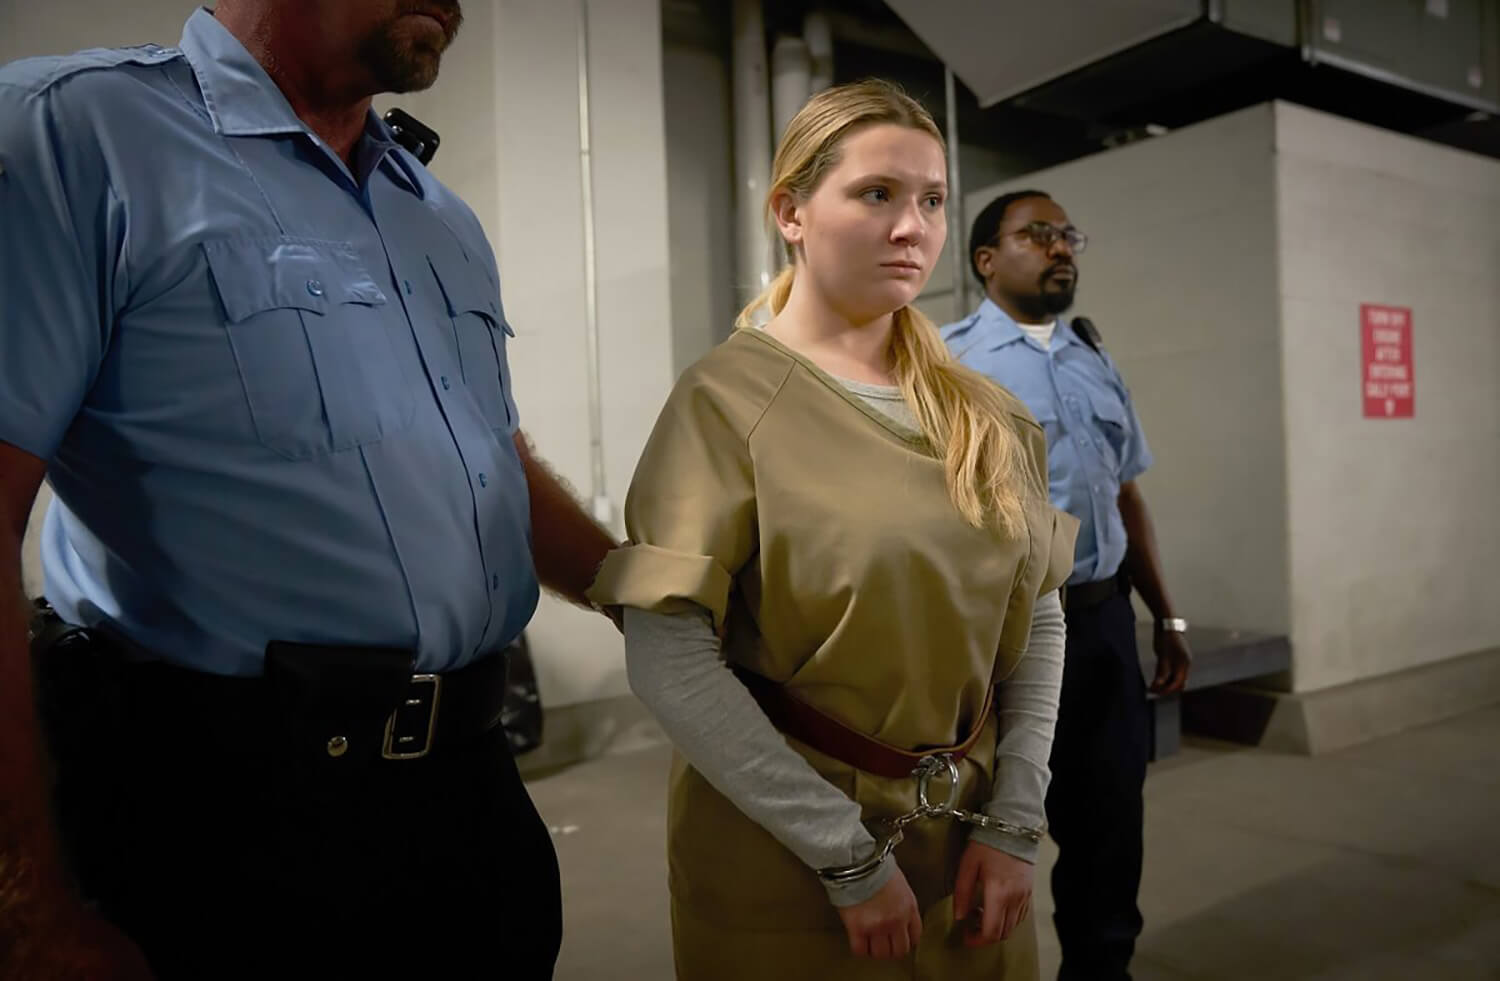 Accused Episode 10 cast member Abigail Breslin as Esme, escorted by two cops.